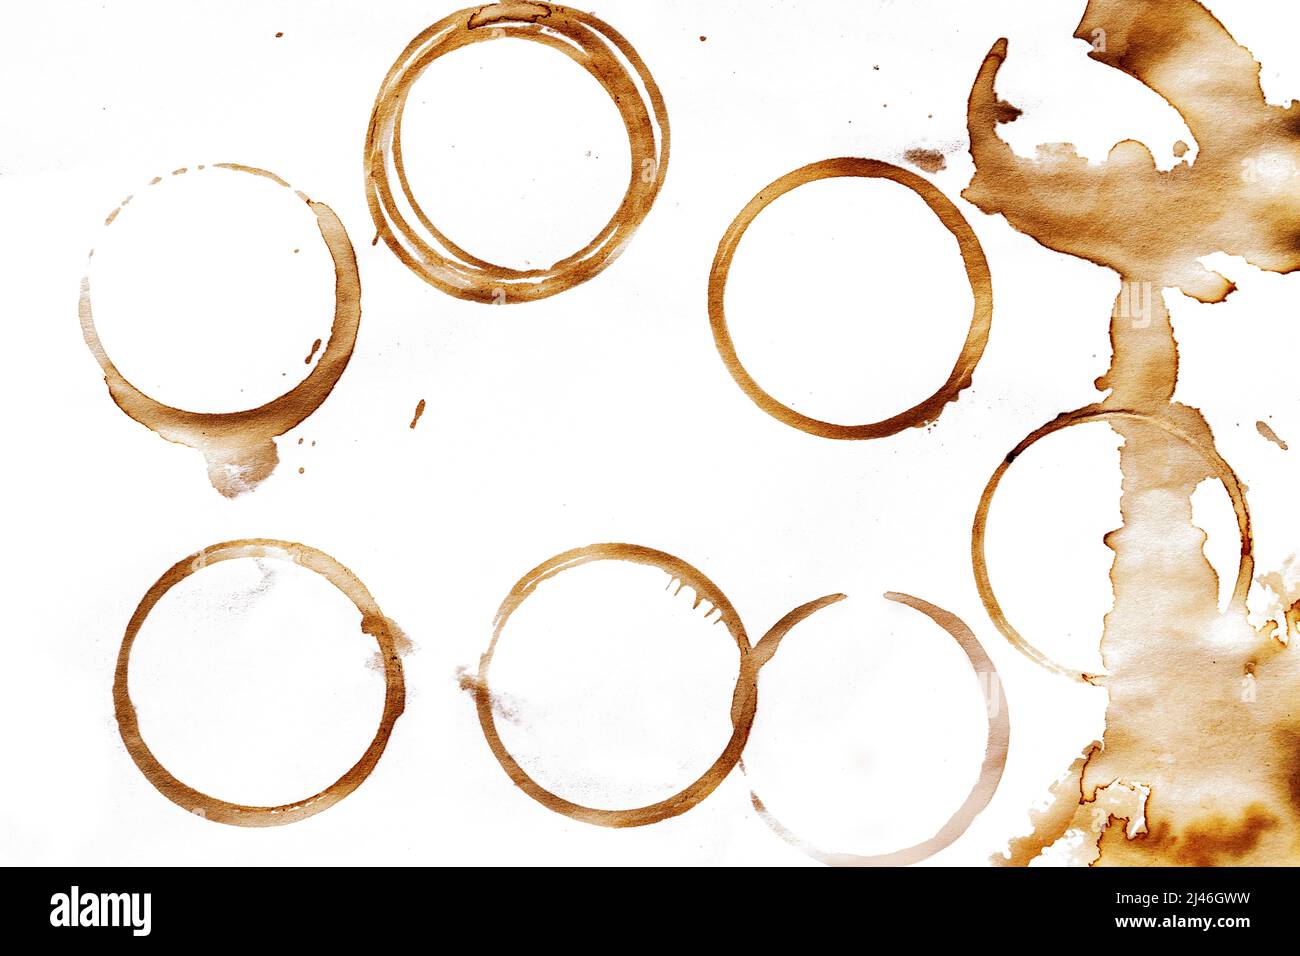 Coffee stains and coffee cup marks splatters design pack Stock Photo